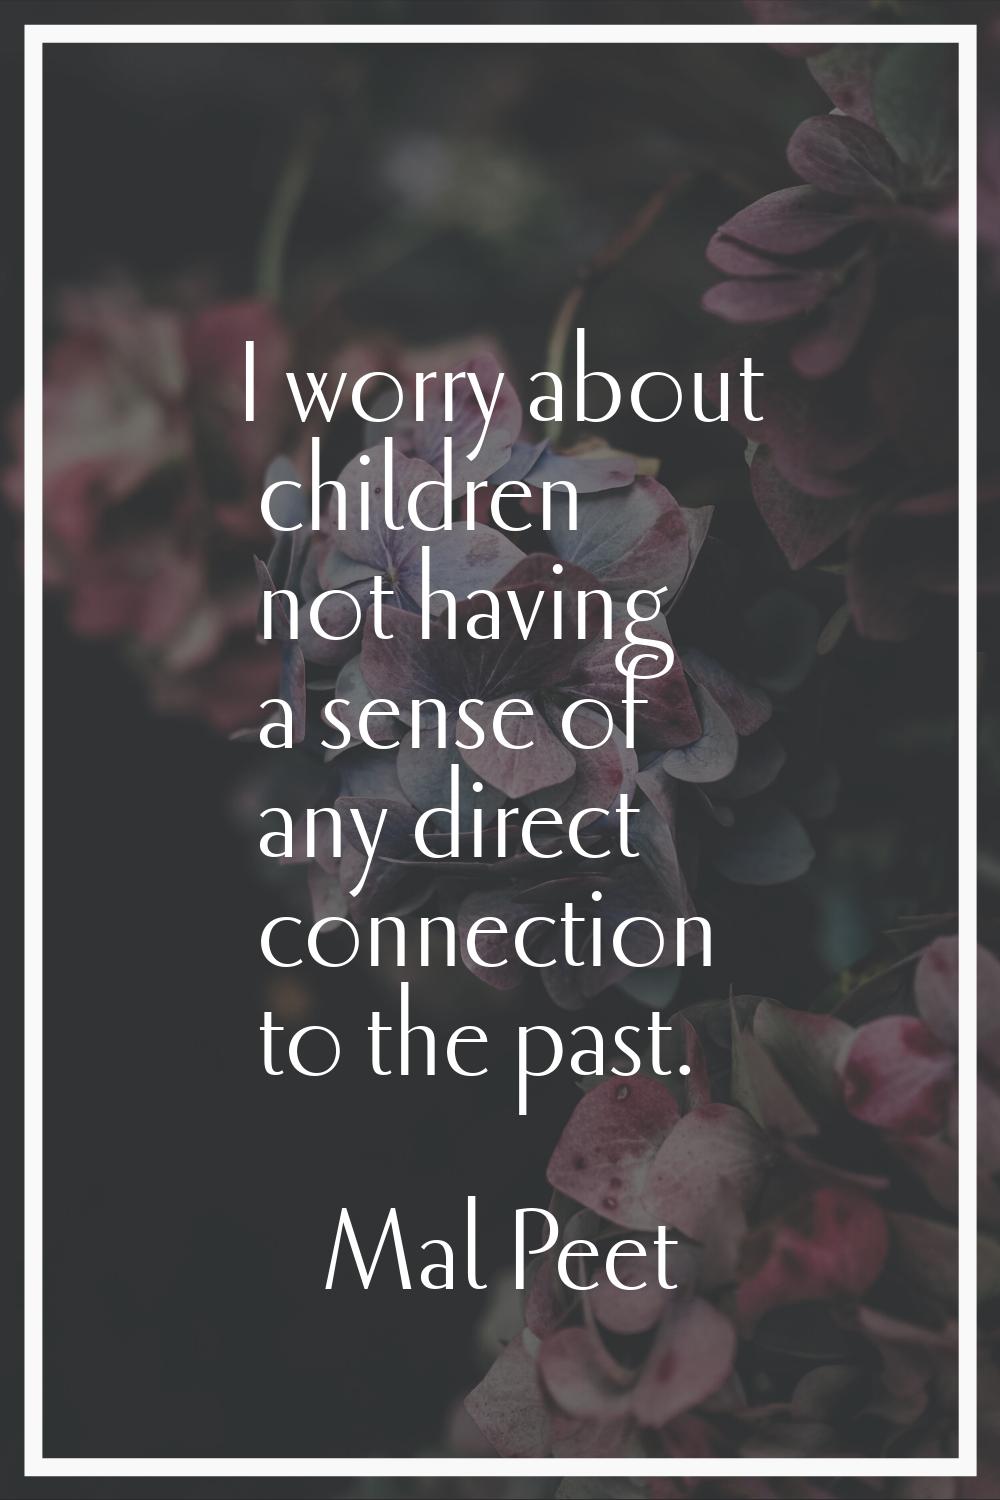 I worry about children not having a sense of any direct connection to the past.